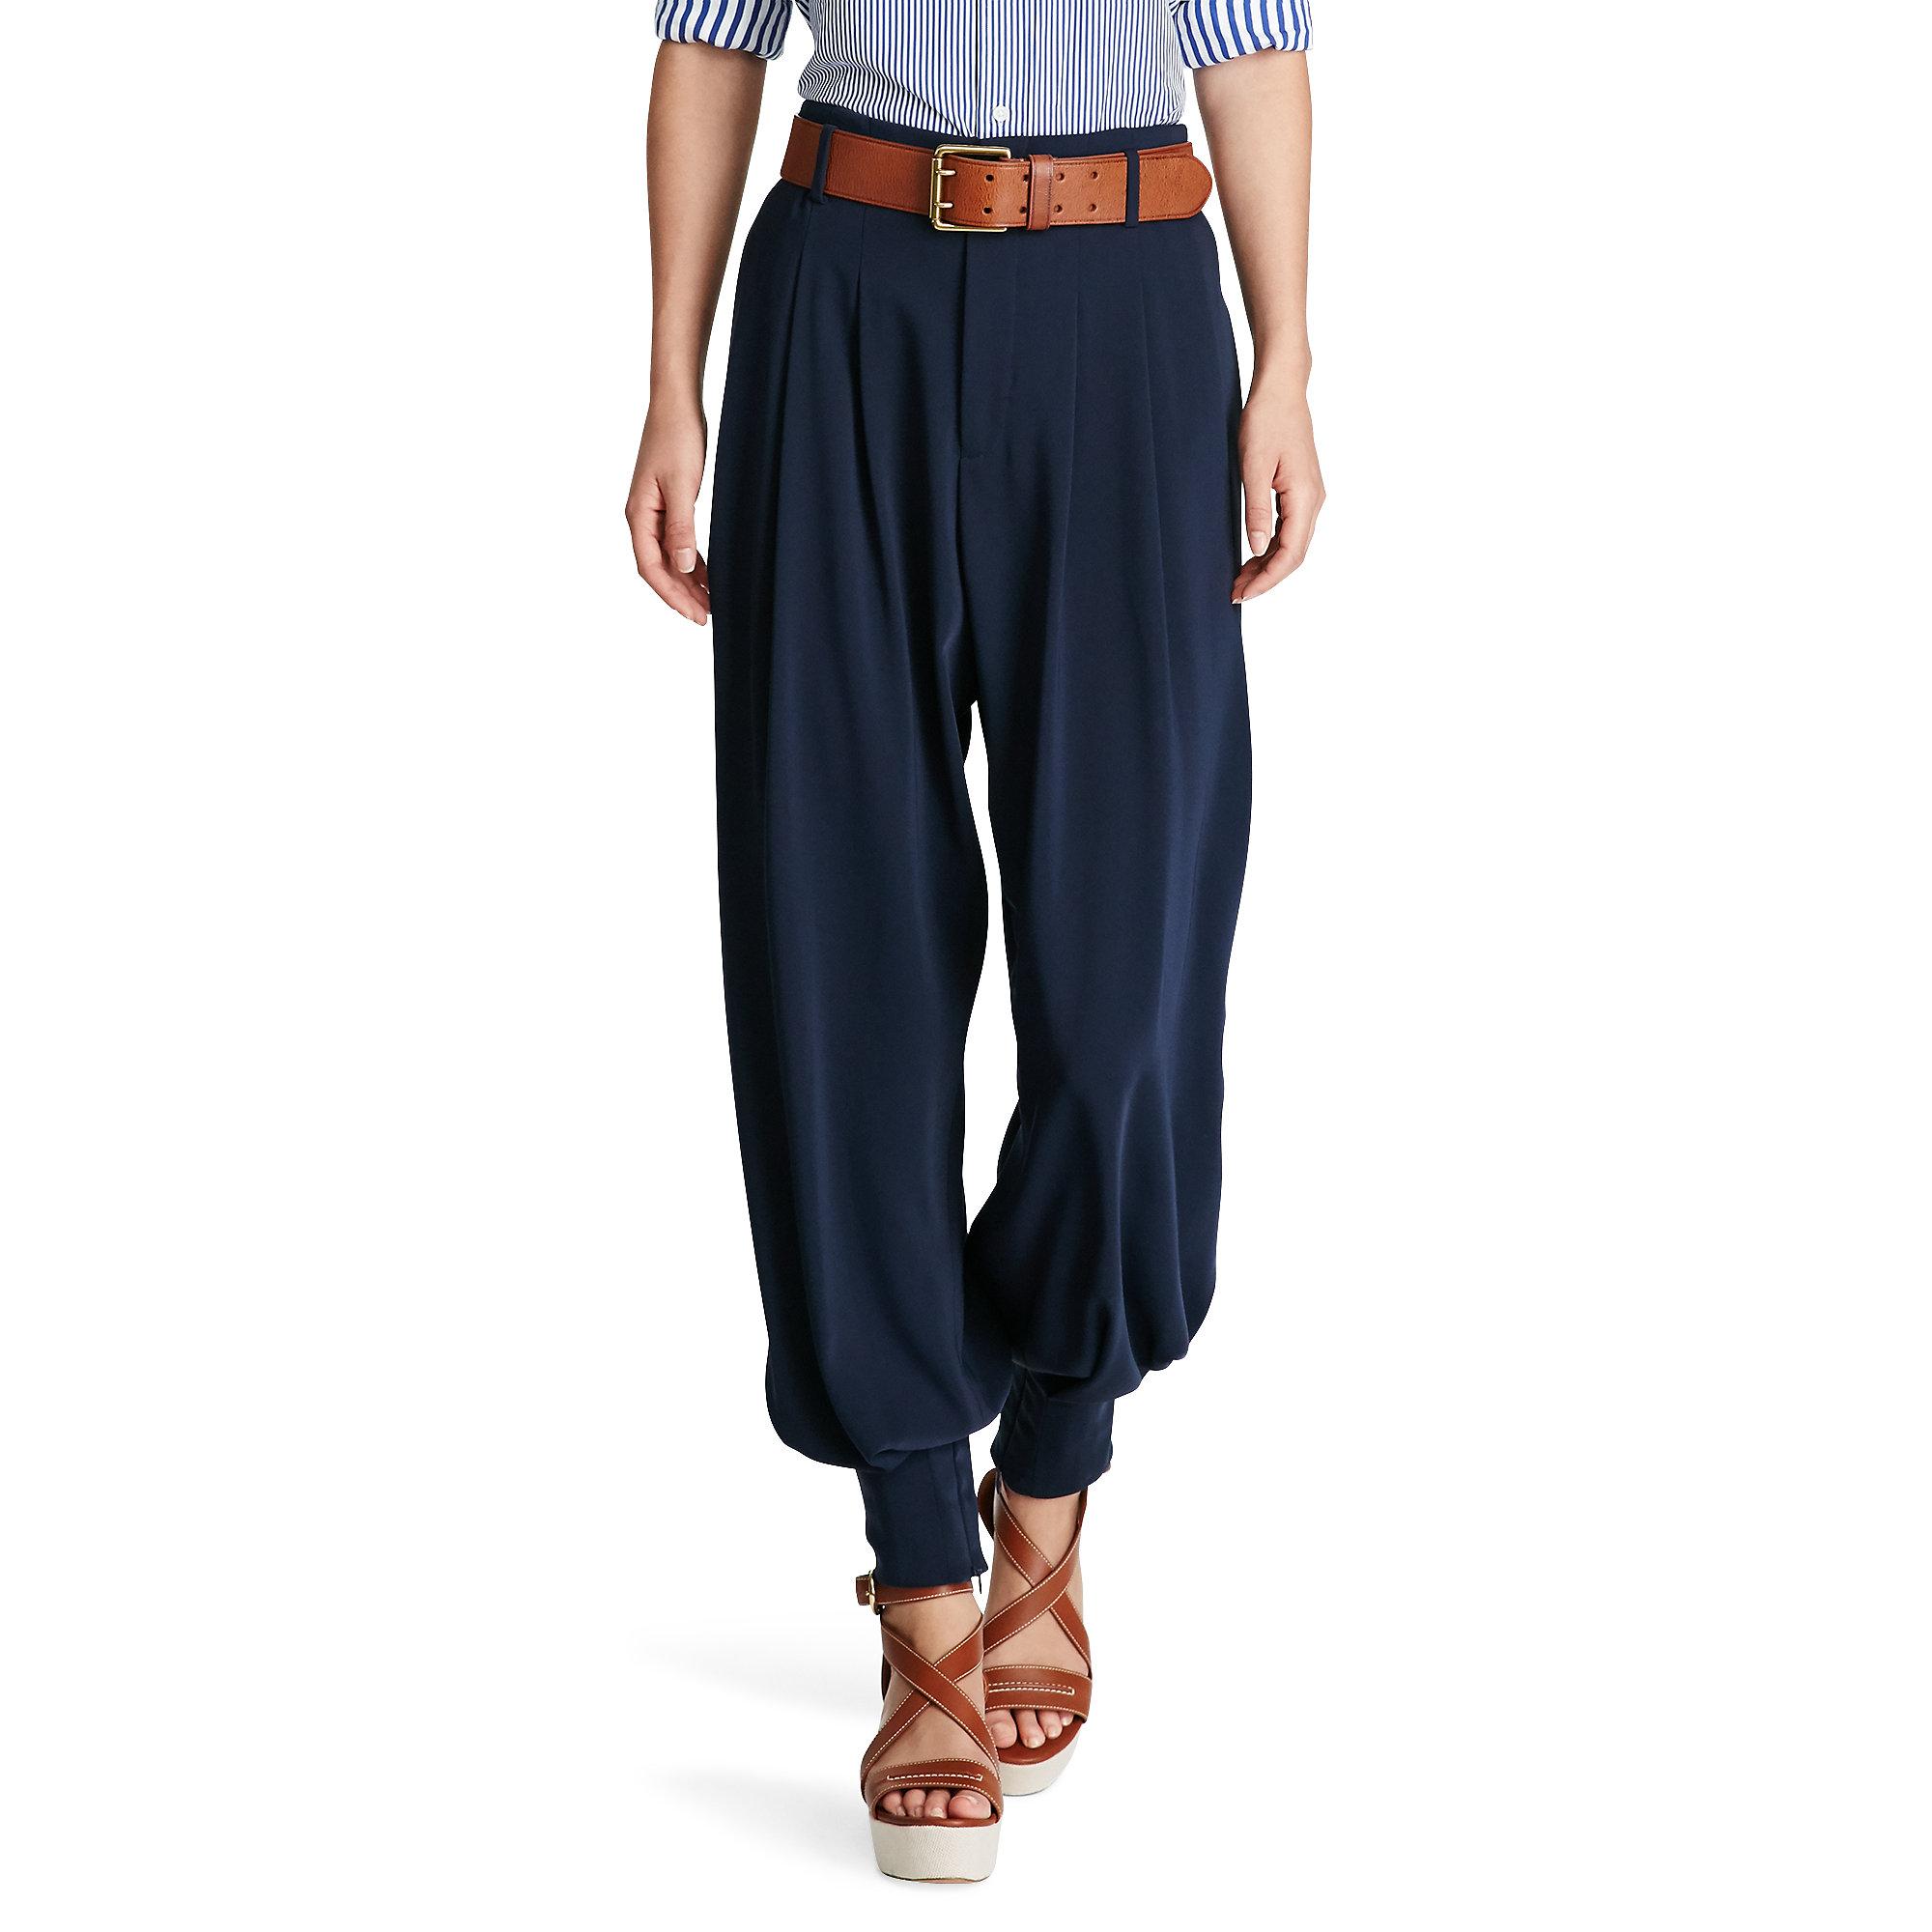 Lyst - Polo Ralph Lauren Twill Tapered Wide-leg Pant in Blue